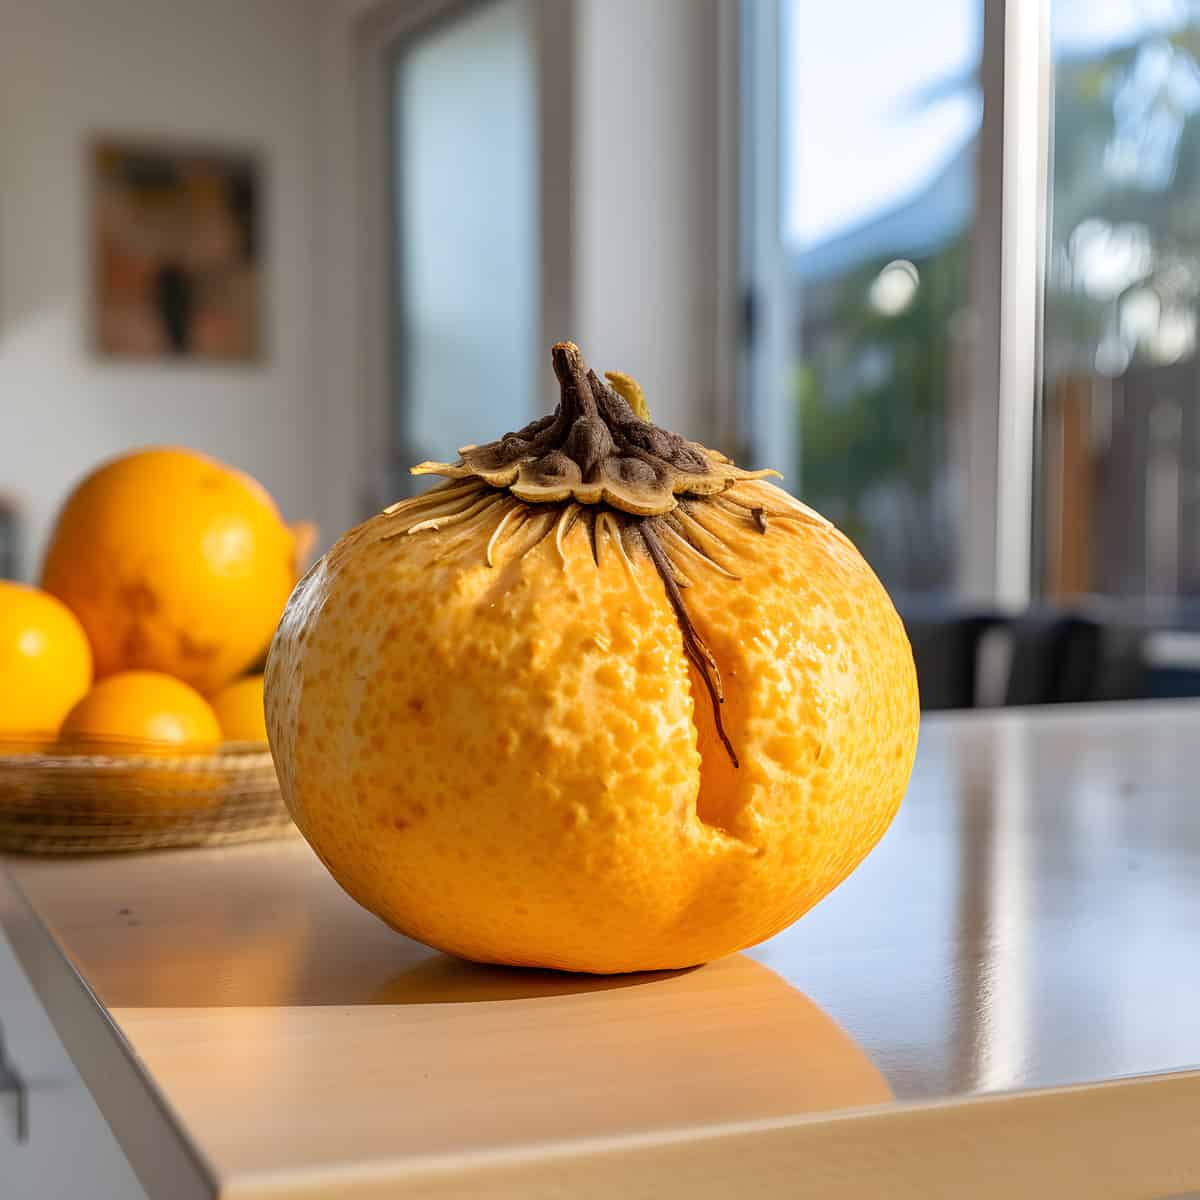 Pompia on a kitchen counter